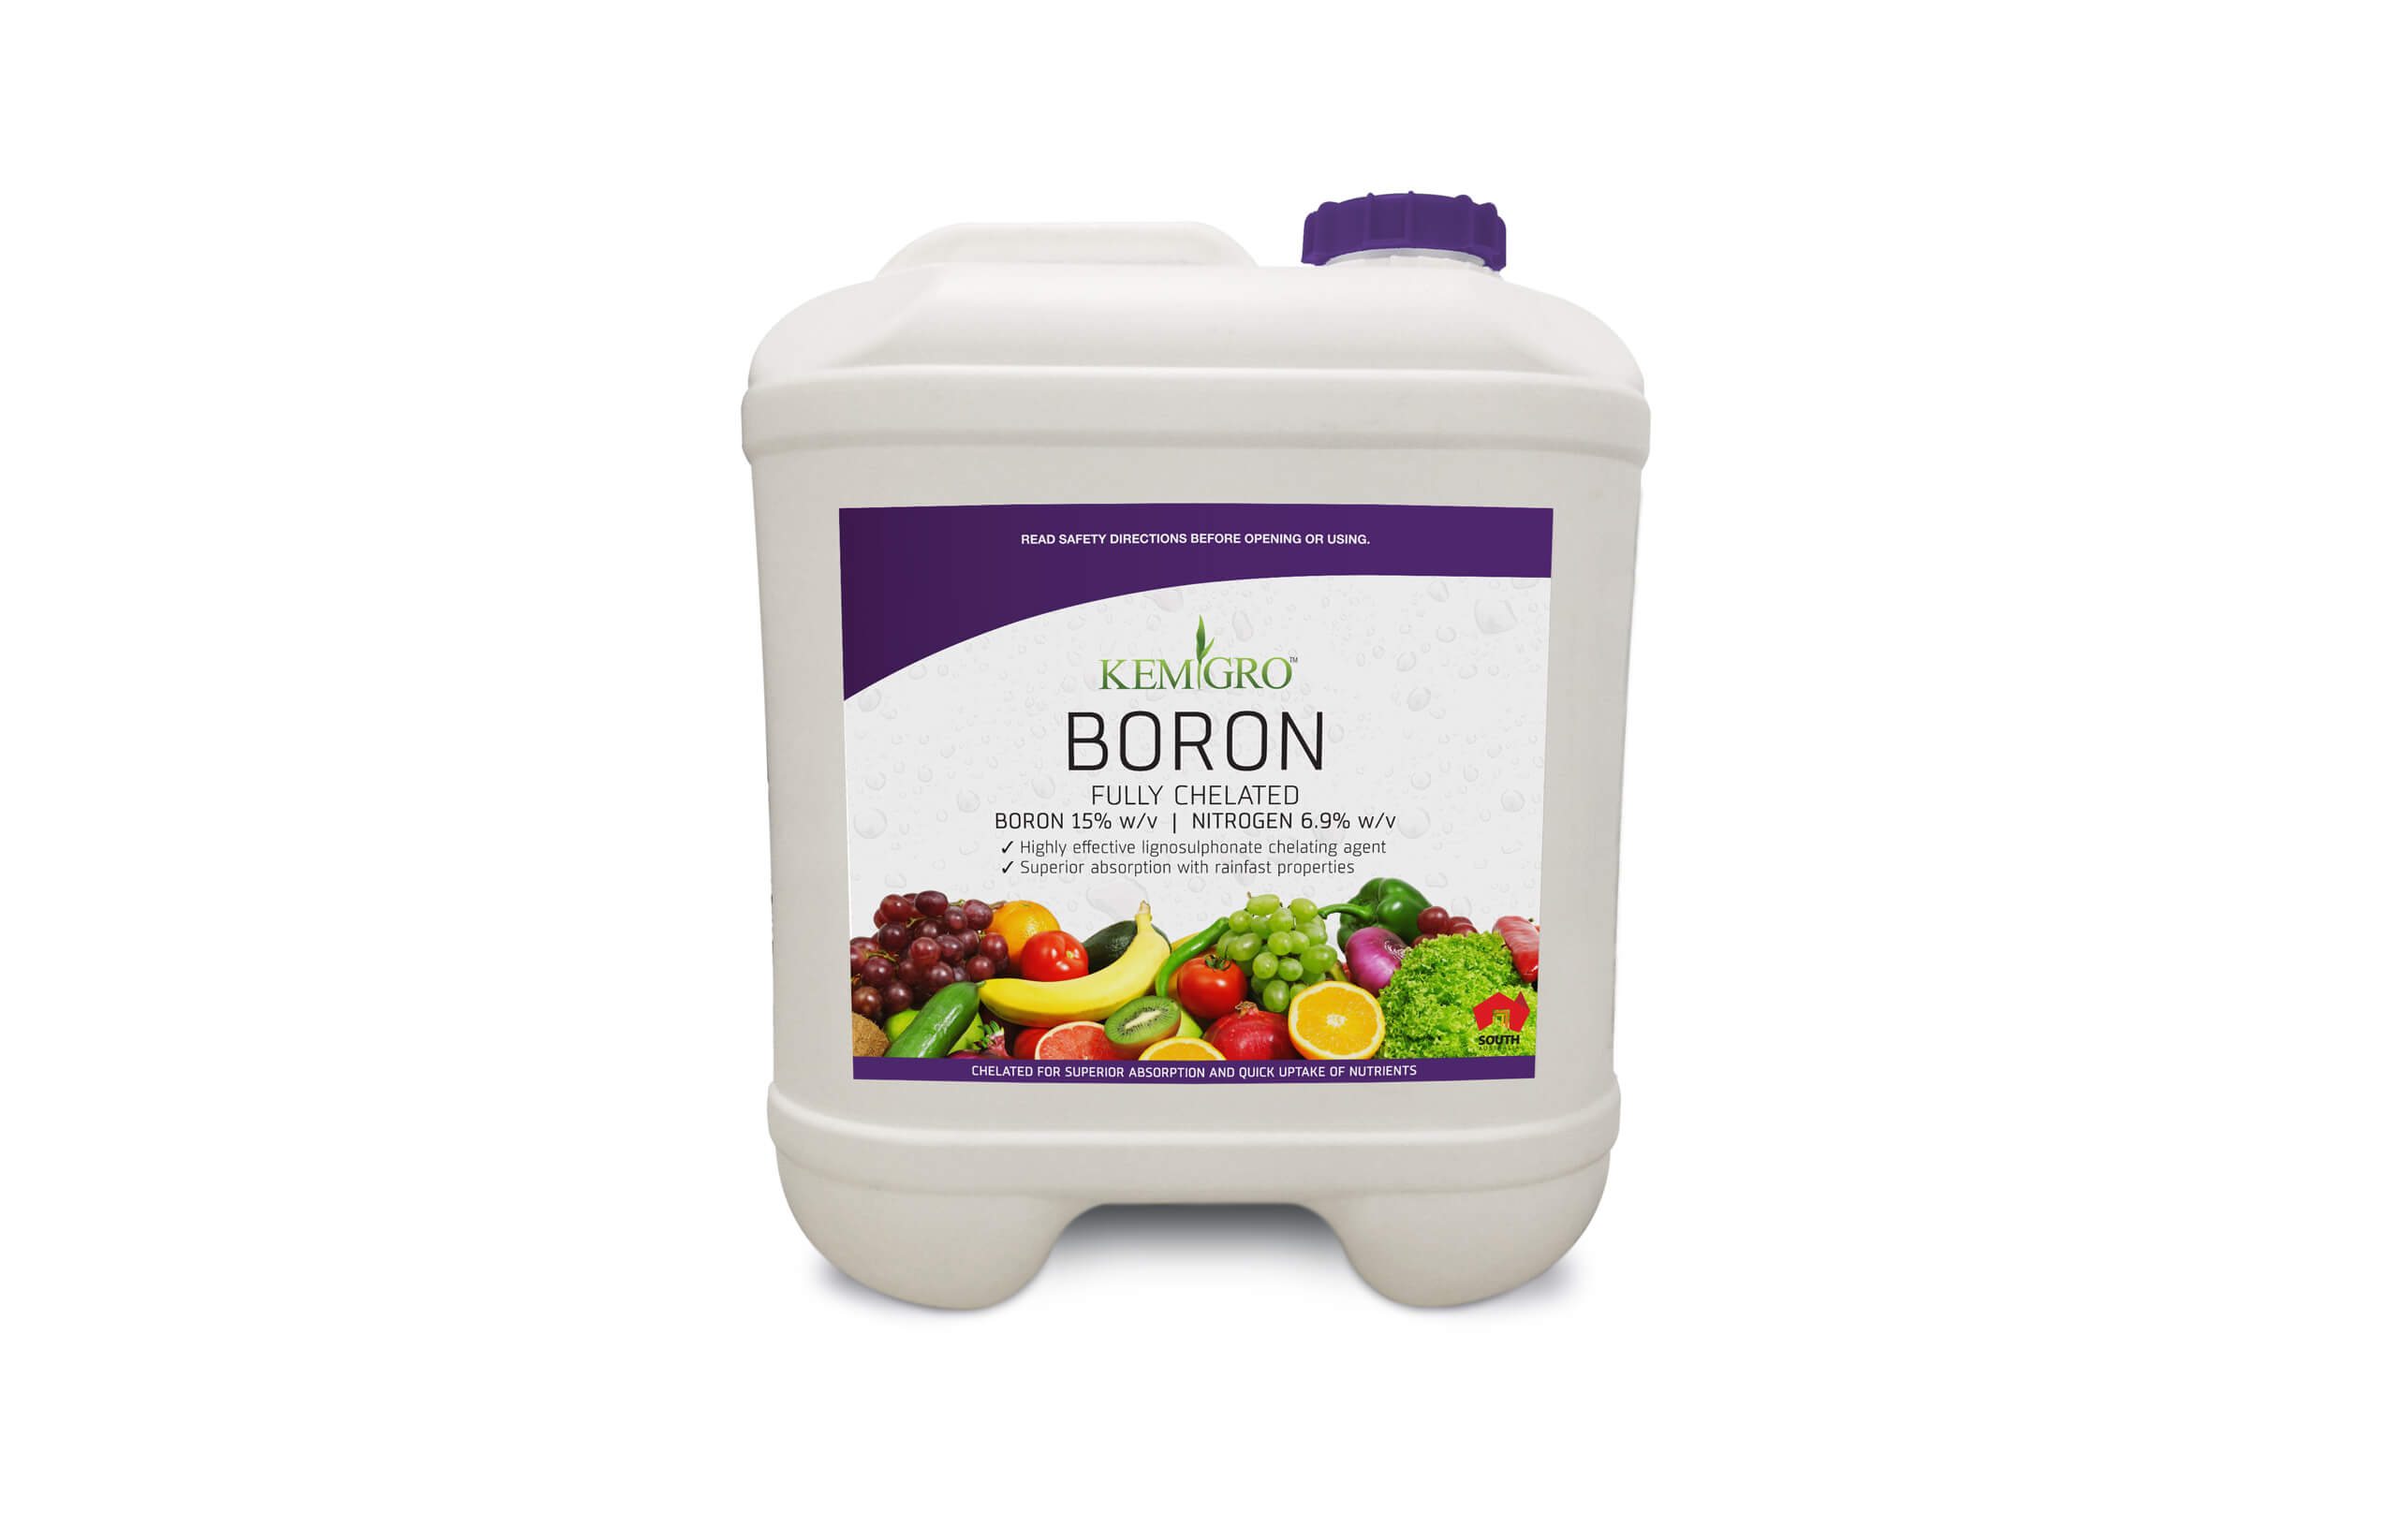 Icon Web Design Adelaide. Image of a Kemgro Boron 20 Litre container.